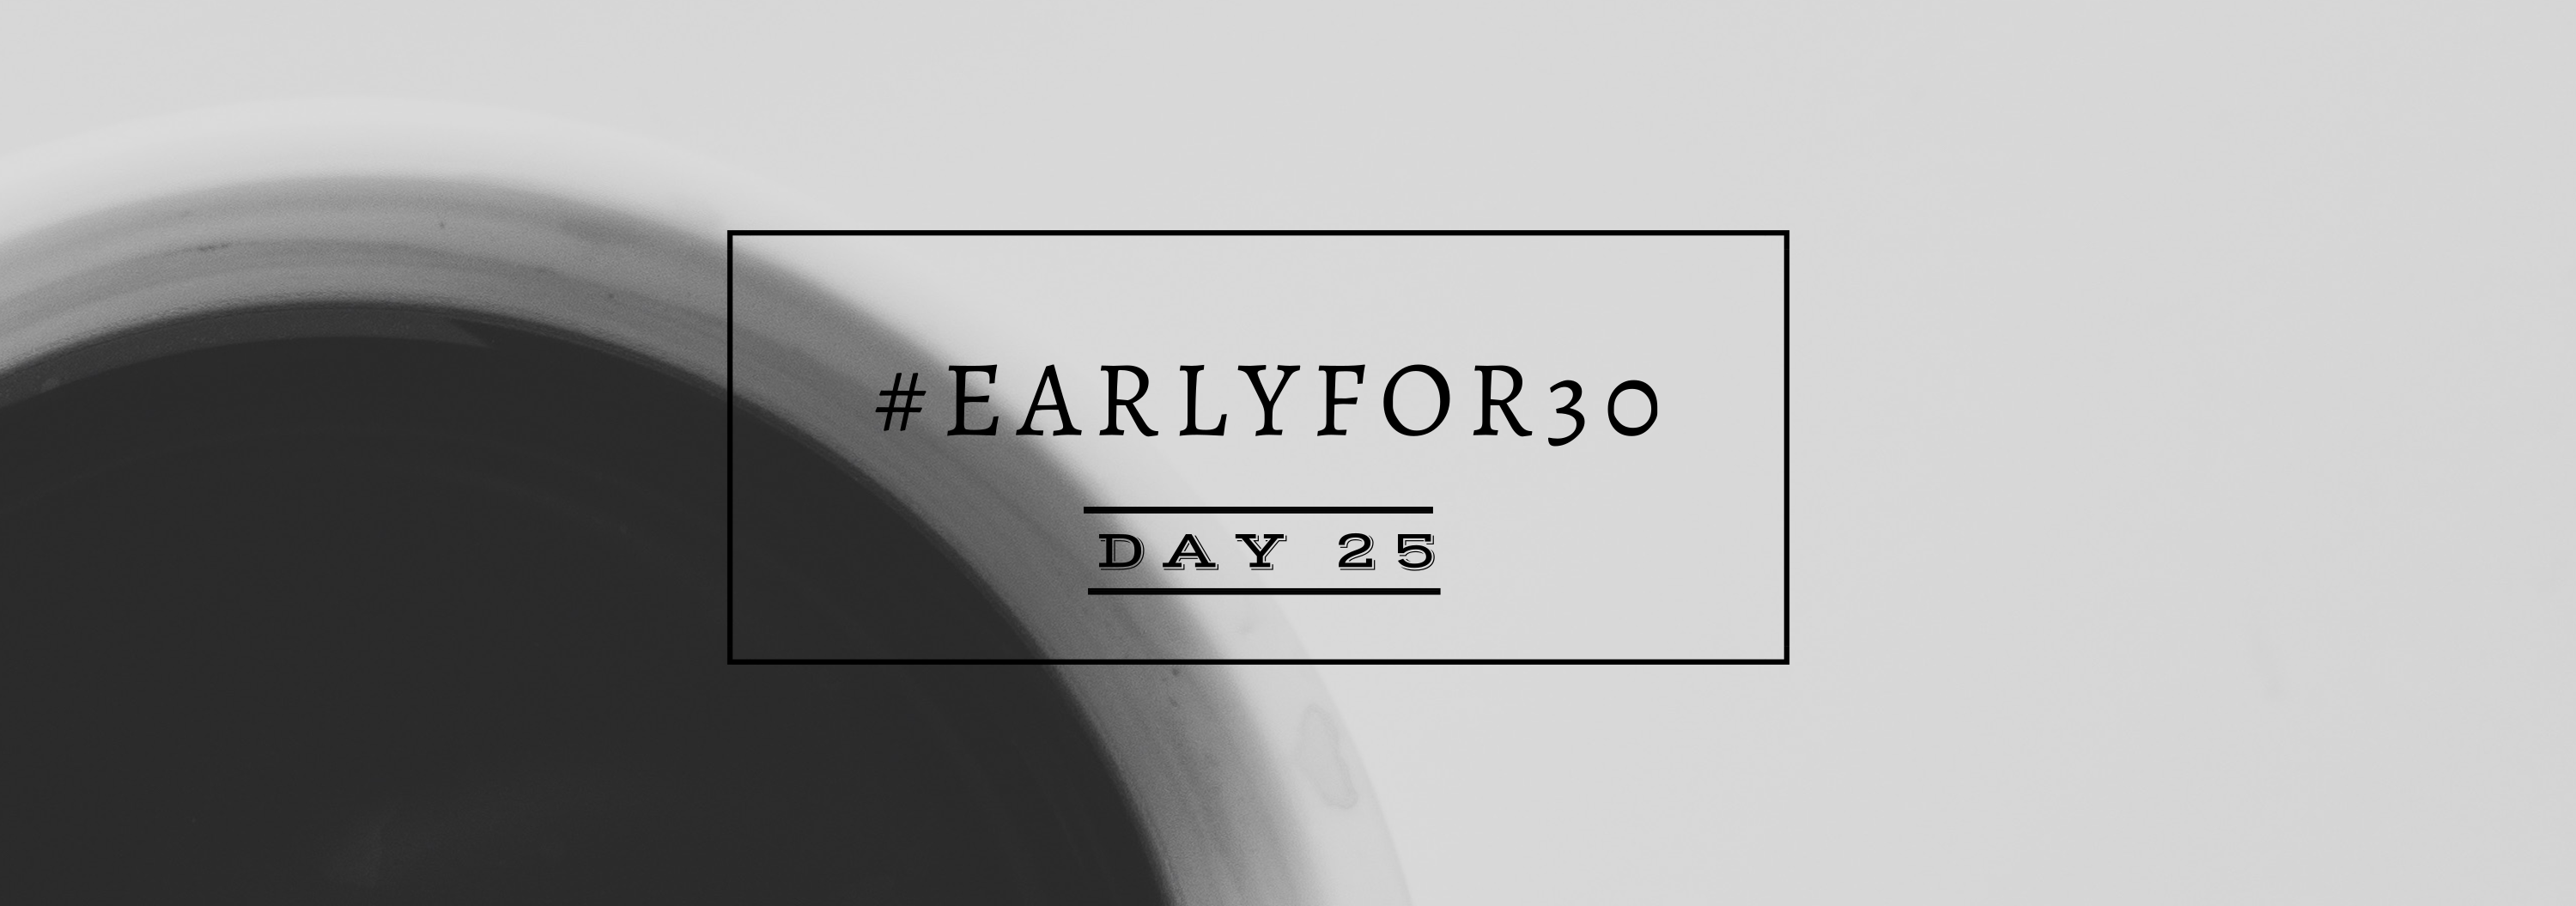 Day 25 Early for 30 Days Challenge